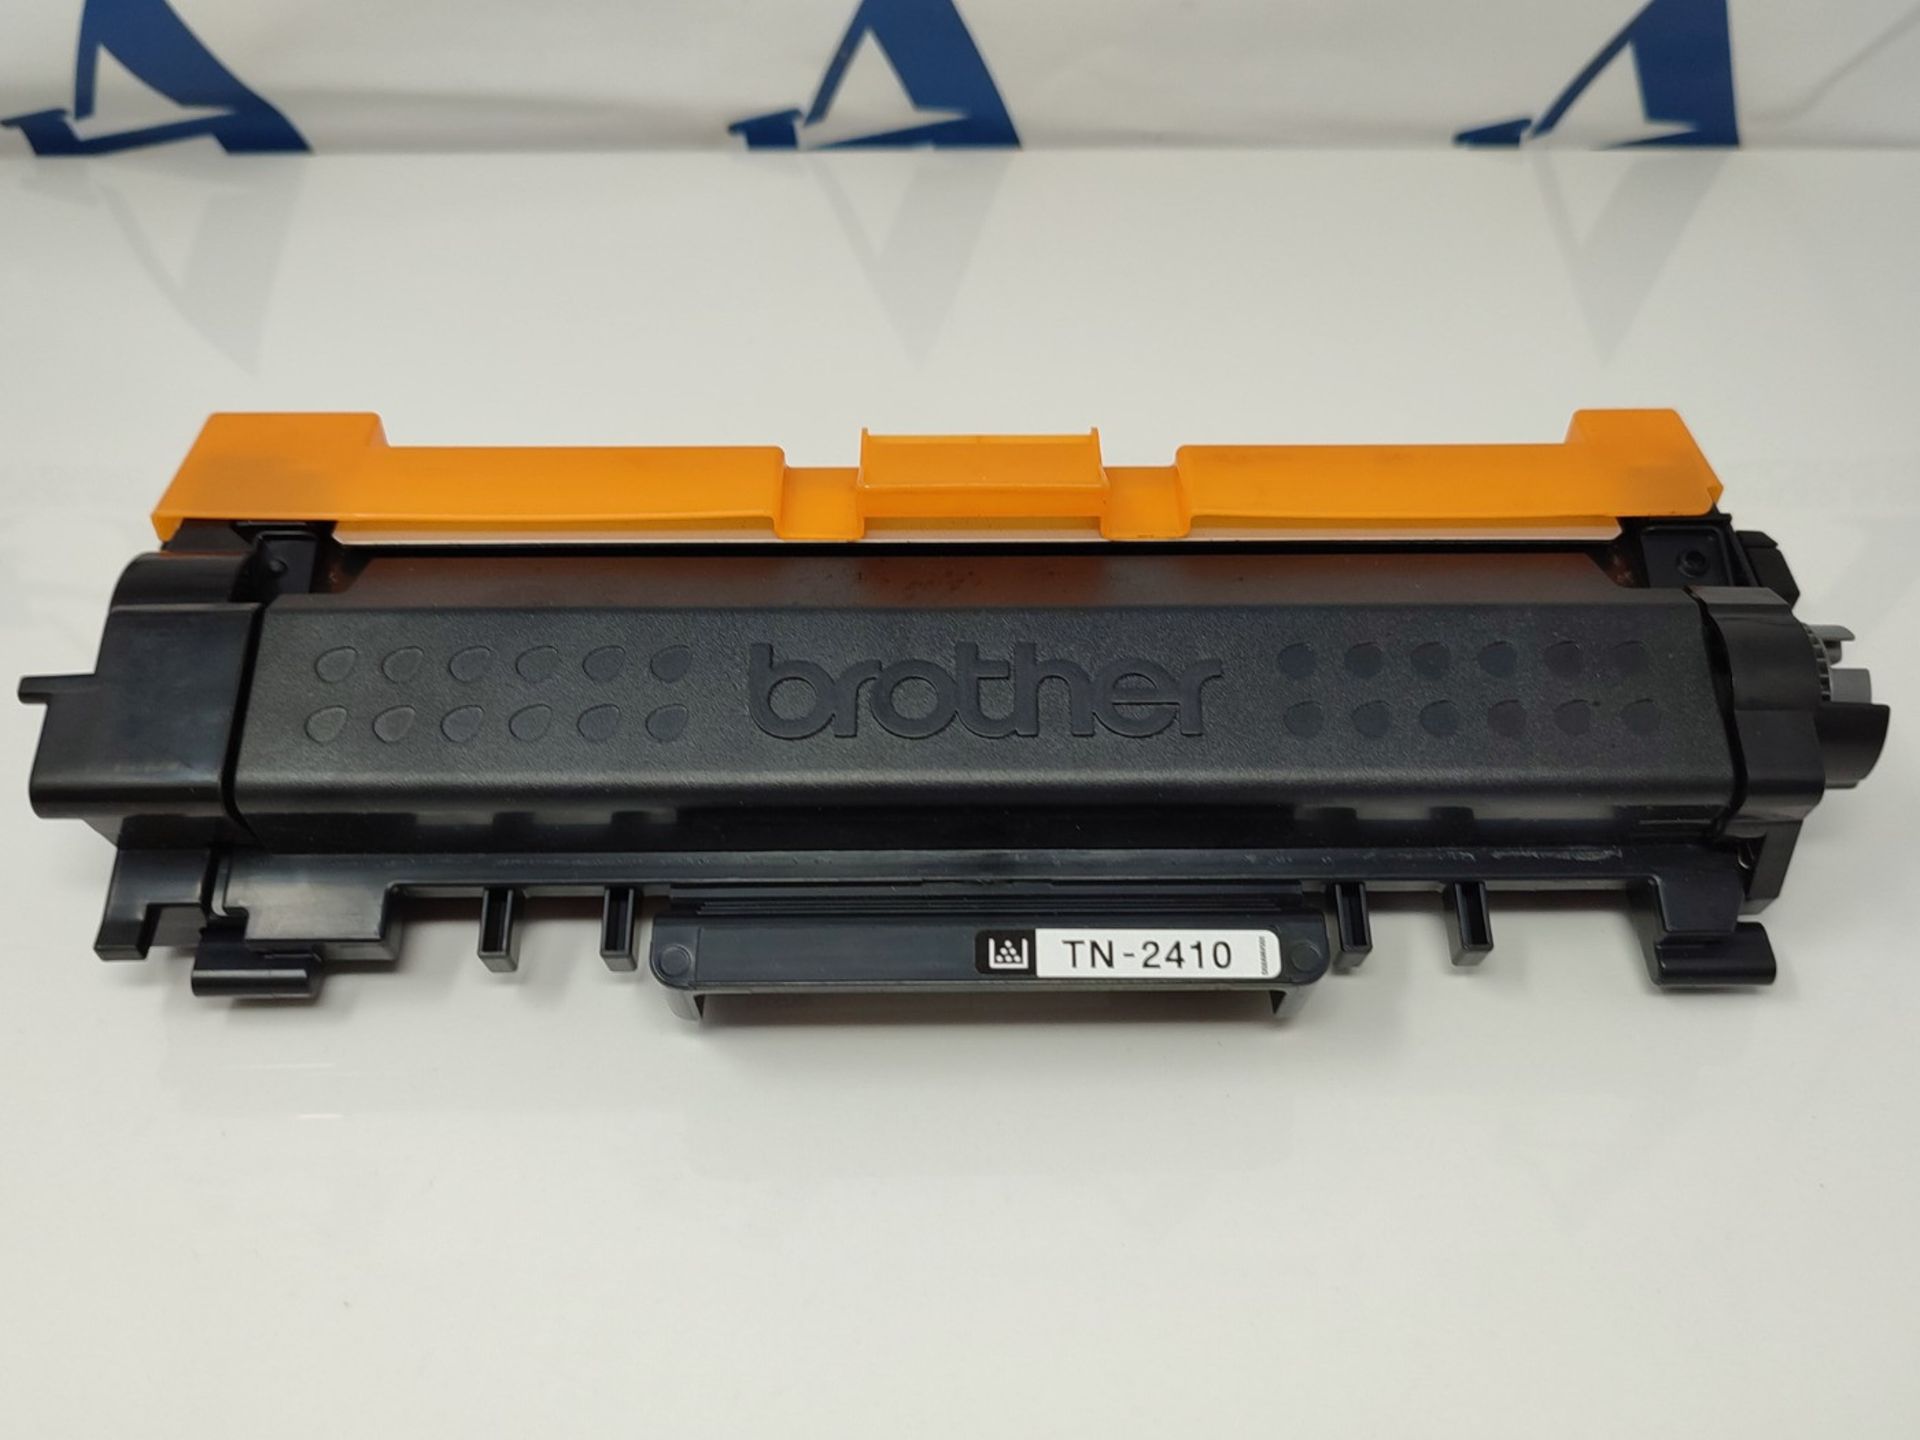 Brother TN-2410 Toner Cartridge, Black, Single Pack, Standard Yield, Includes 1 x Tone - Image 3 of 3